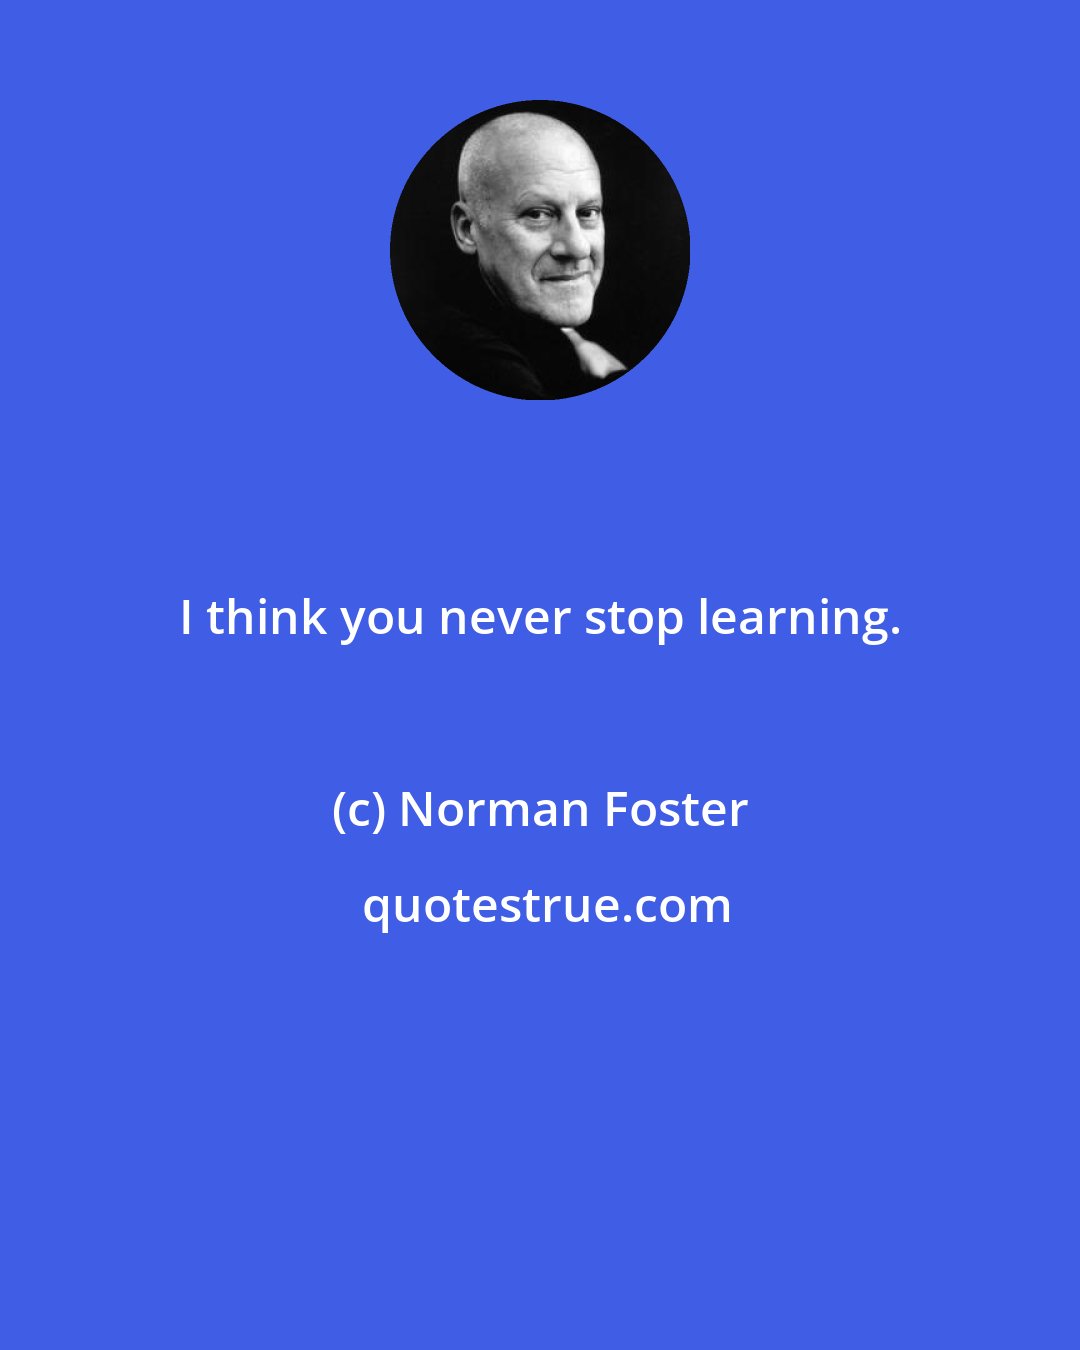 Norman Foster: I think you never stop learning.